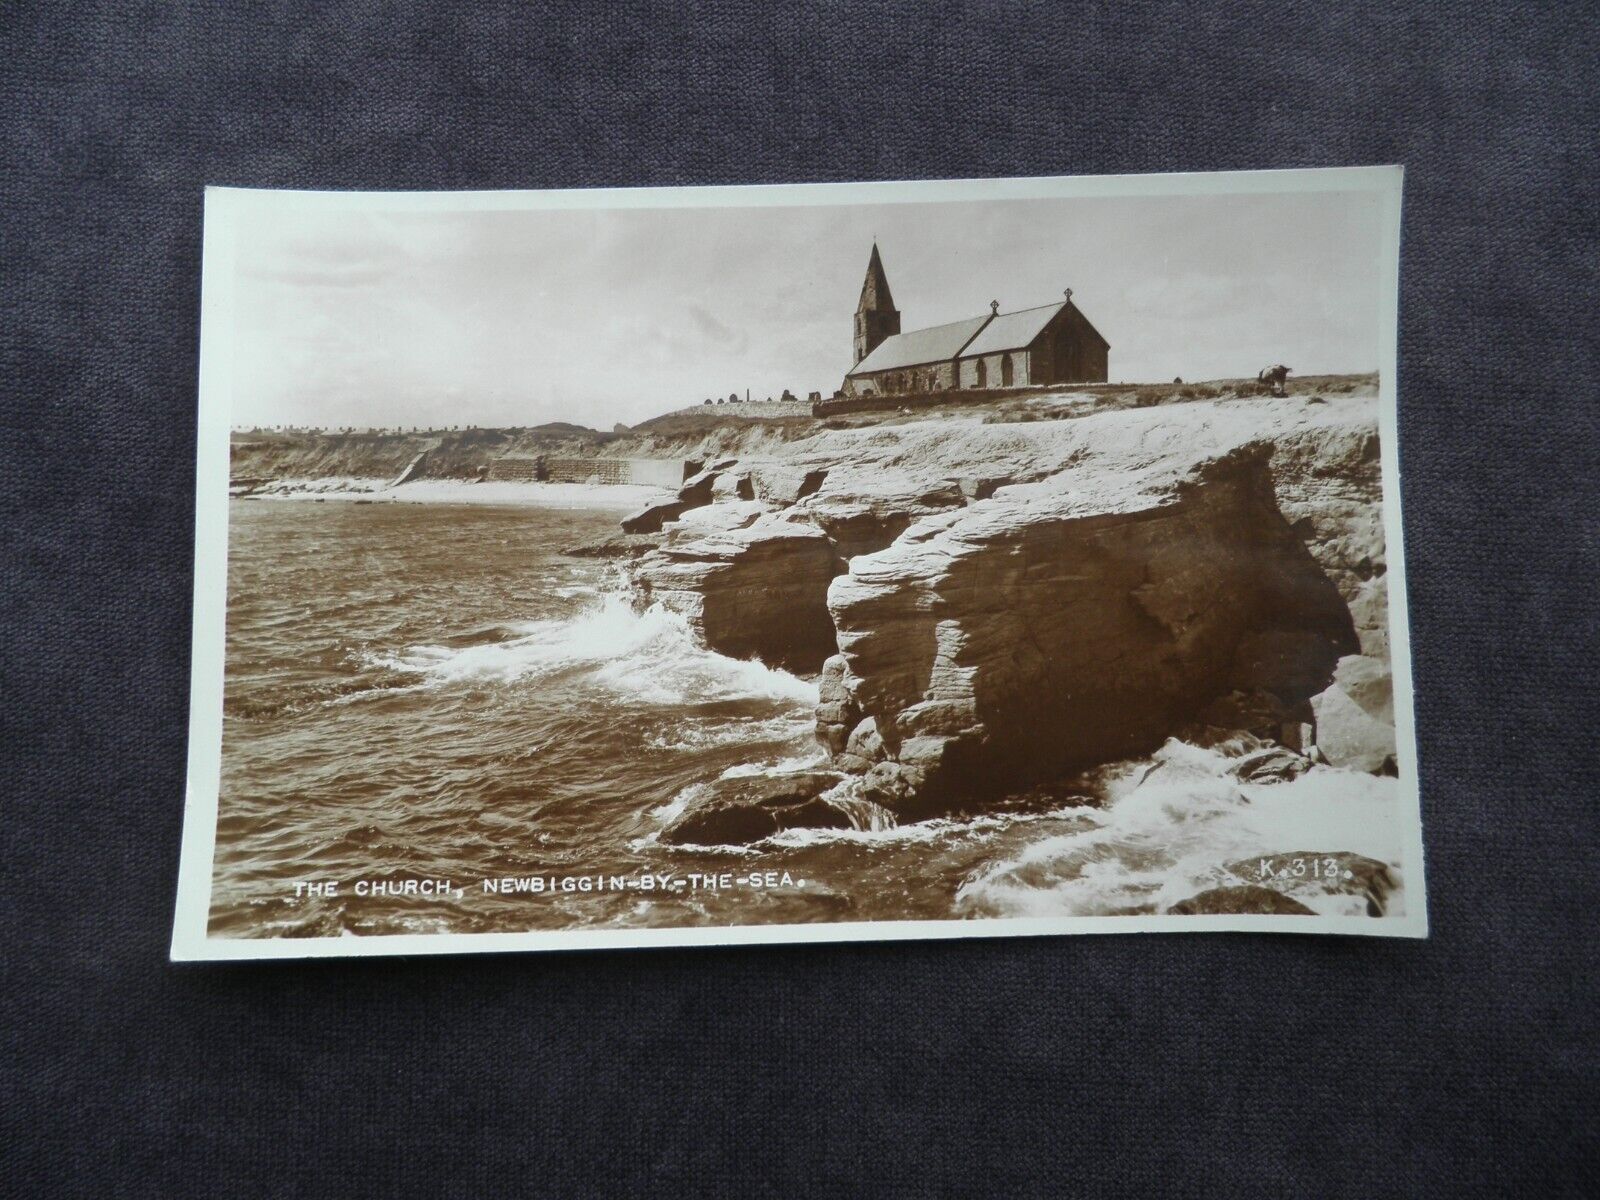 House Clearance - Old Real Photograph Service of The Church, Newbiggin-by-the-Sea, Northumberland